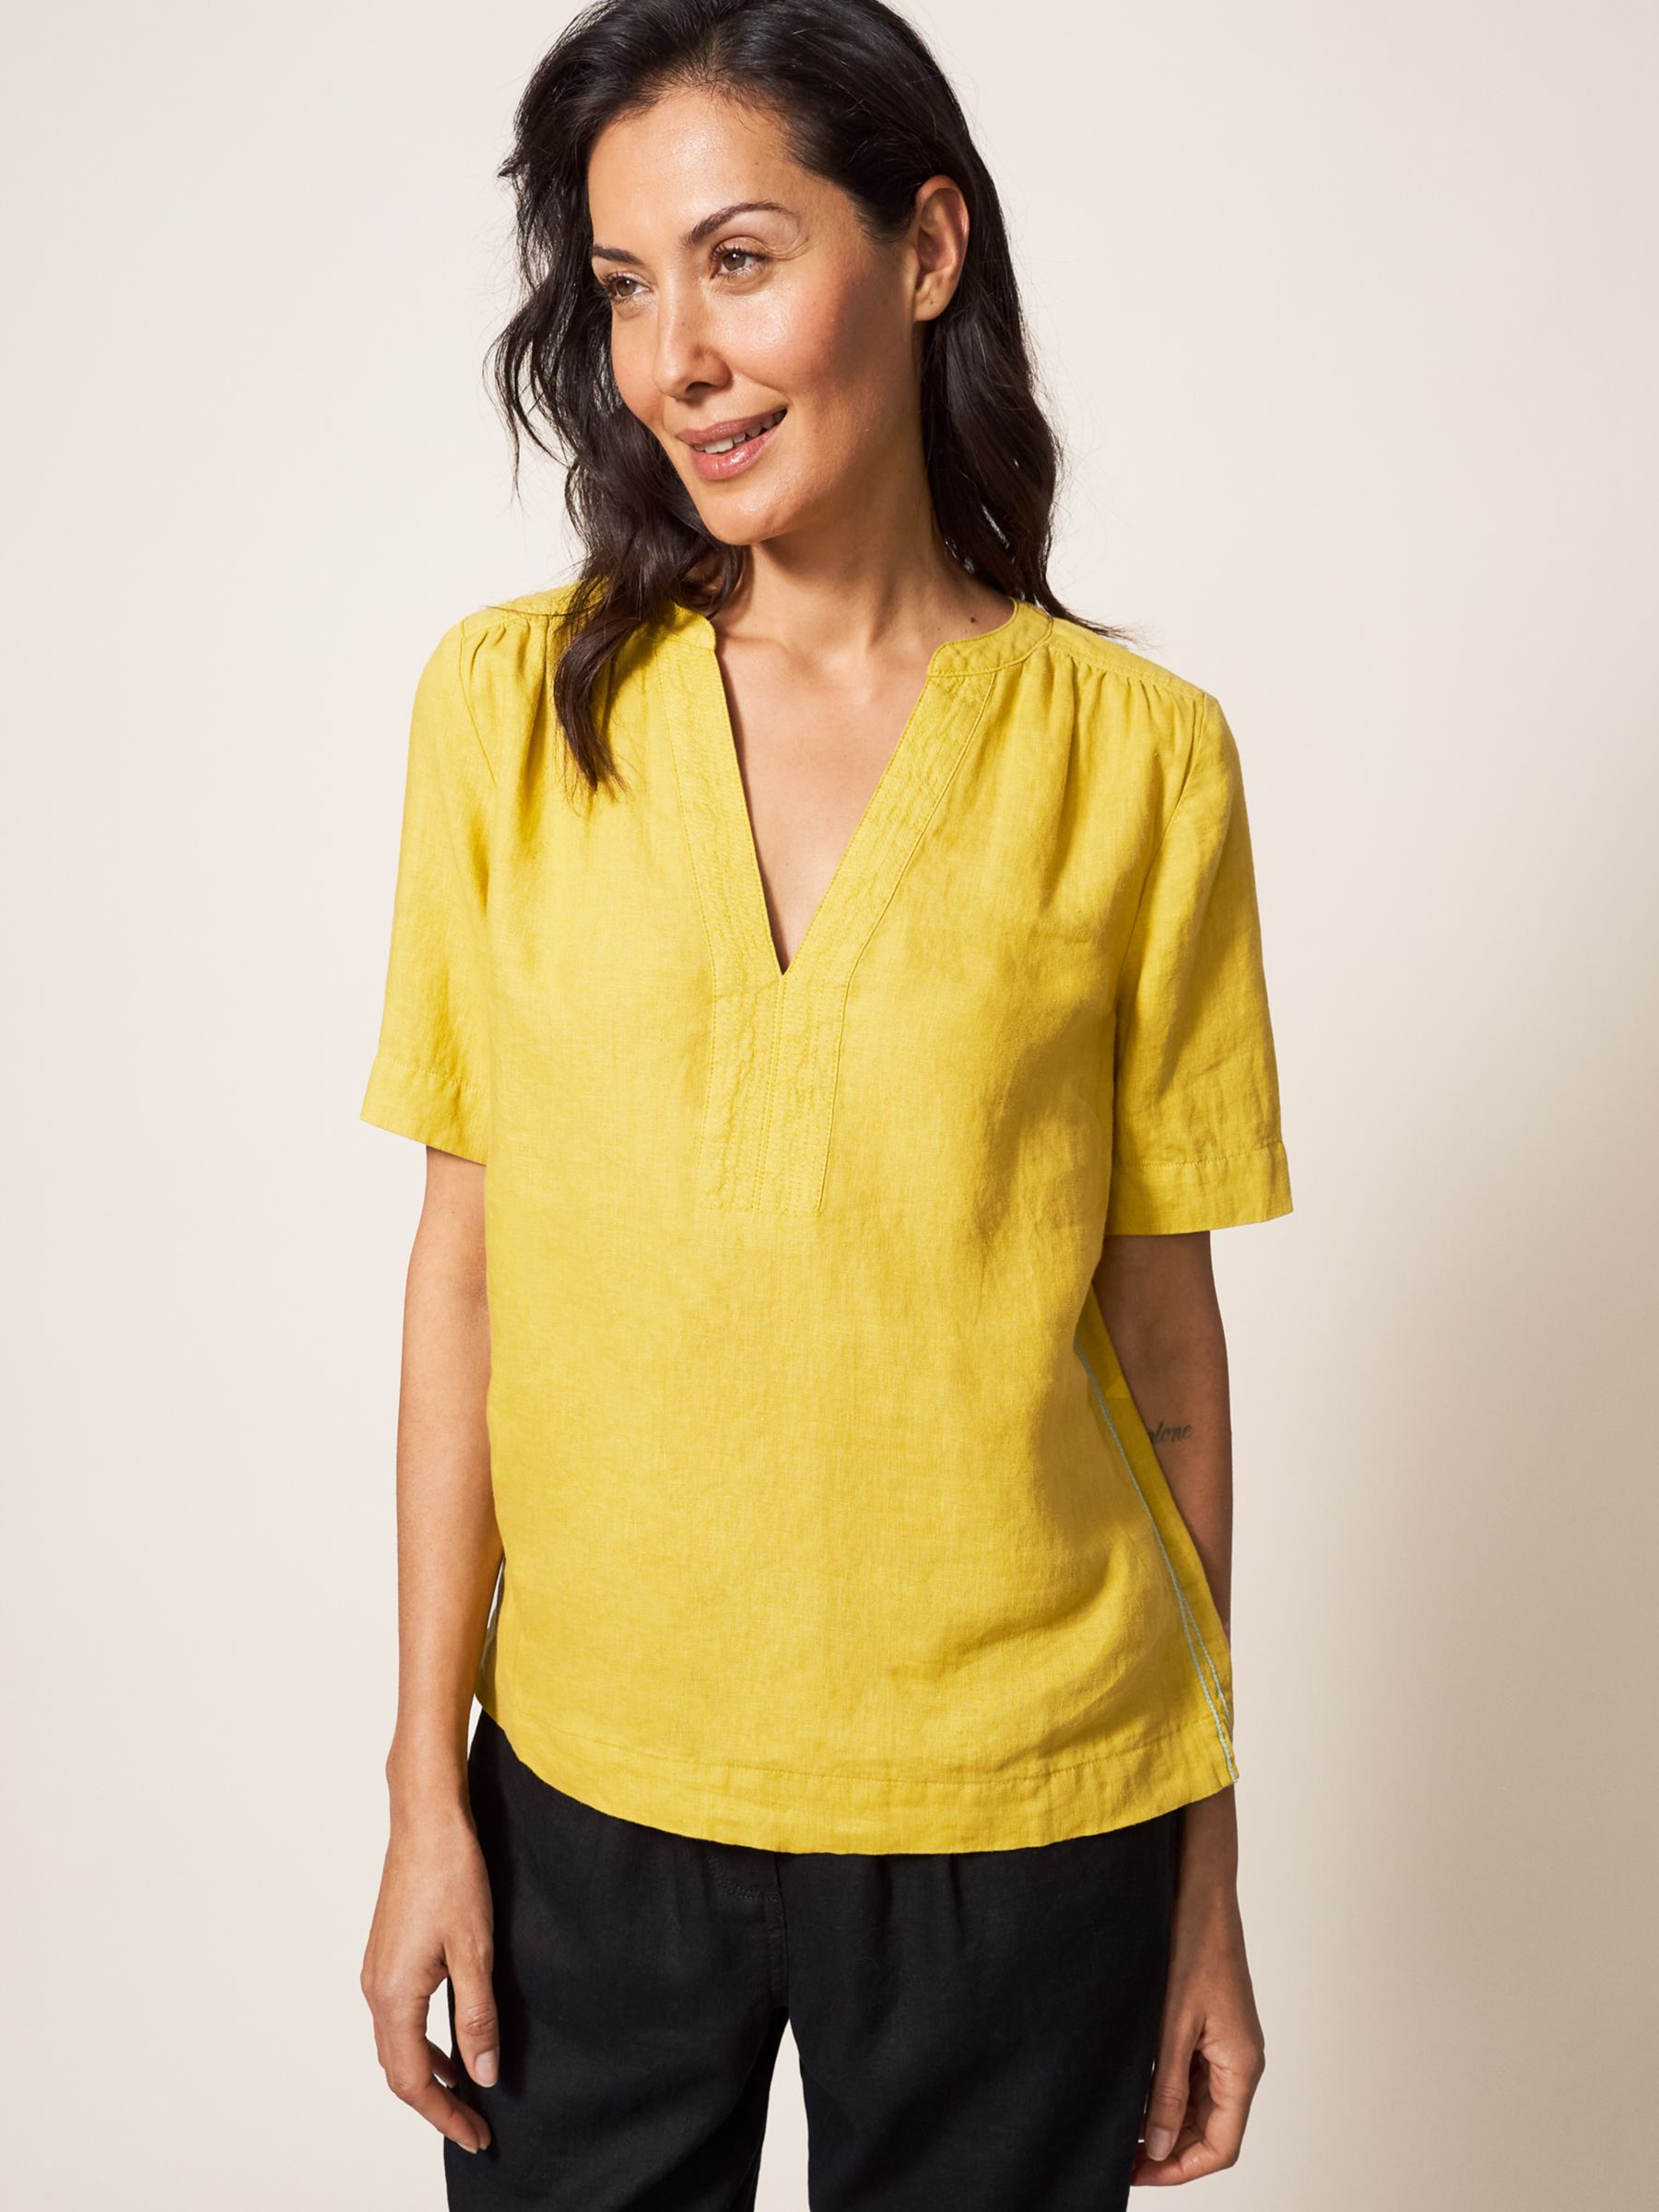 White Stuff June Linen Top, Mid Chartreuse at John Lewis & Partners